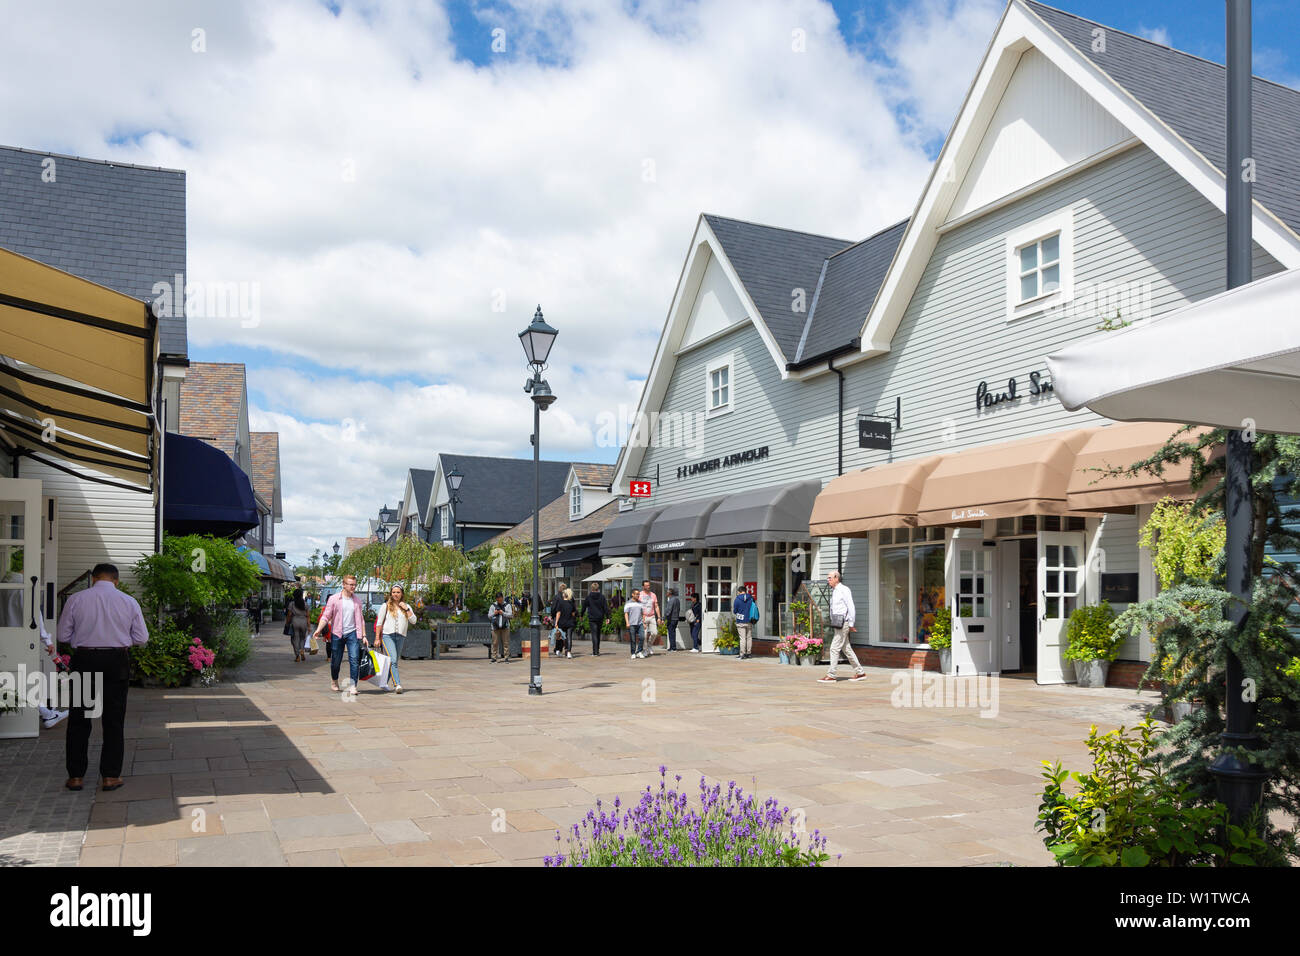 Bicester Village Outlet Shopping Centre, Bicester, Oxfordshire, England, United Kingdom Stock Photo